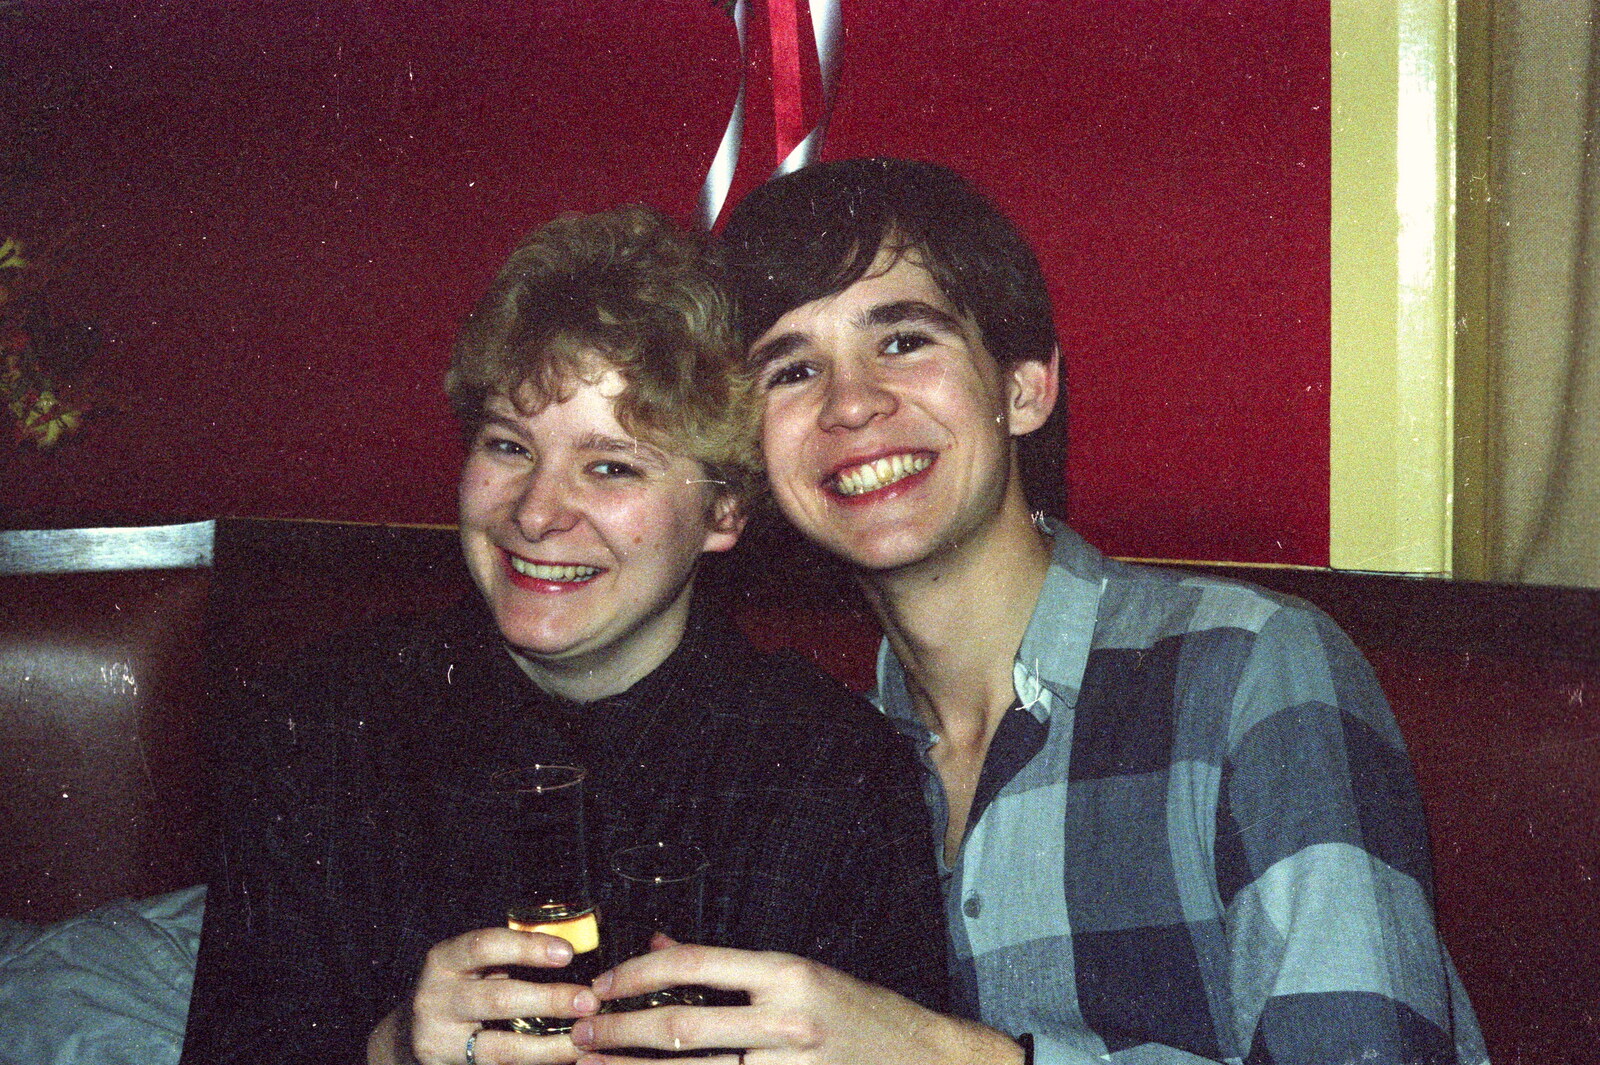 Anna and Phil from Brockenhurst College Presentation and Christmas, Hampshire - 19th December 1985